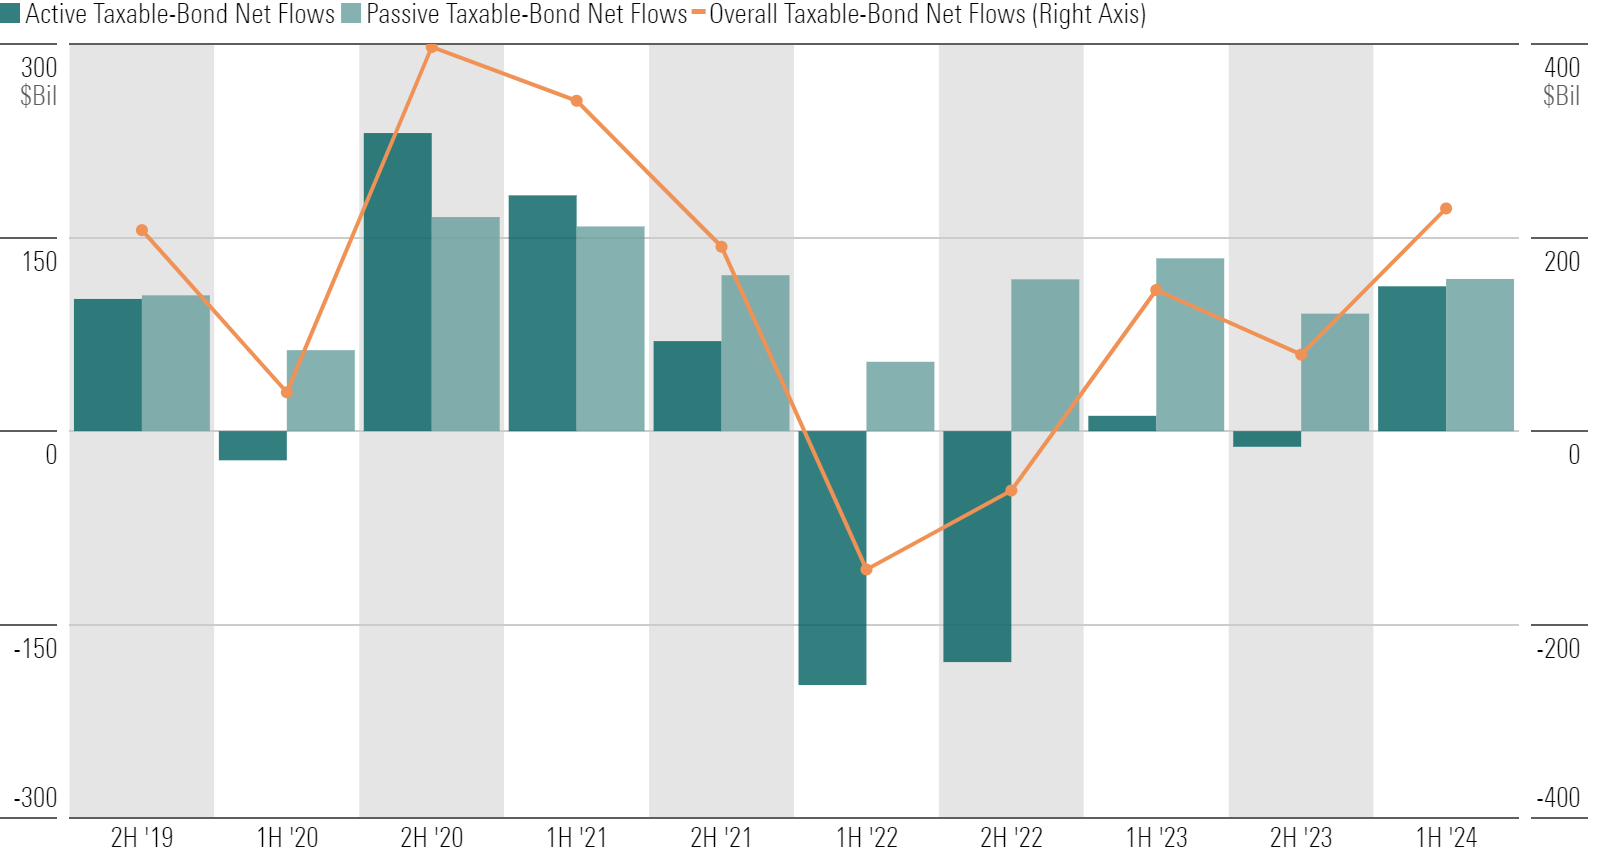 A bar chart of half-yearly taxable-bond fund flows from the second half of 2019 through the first half of 2024.